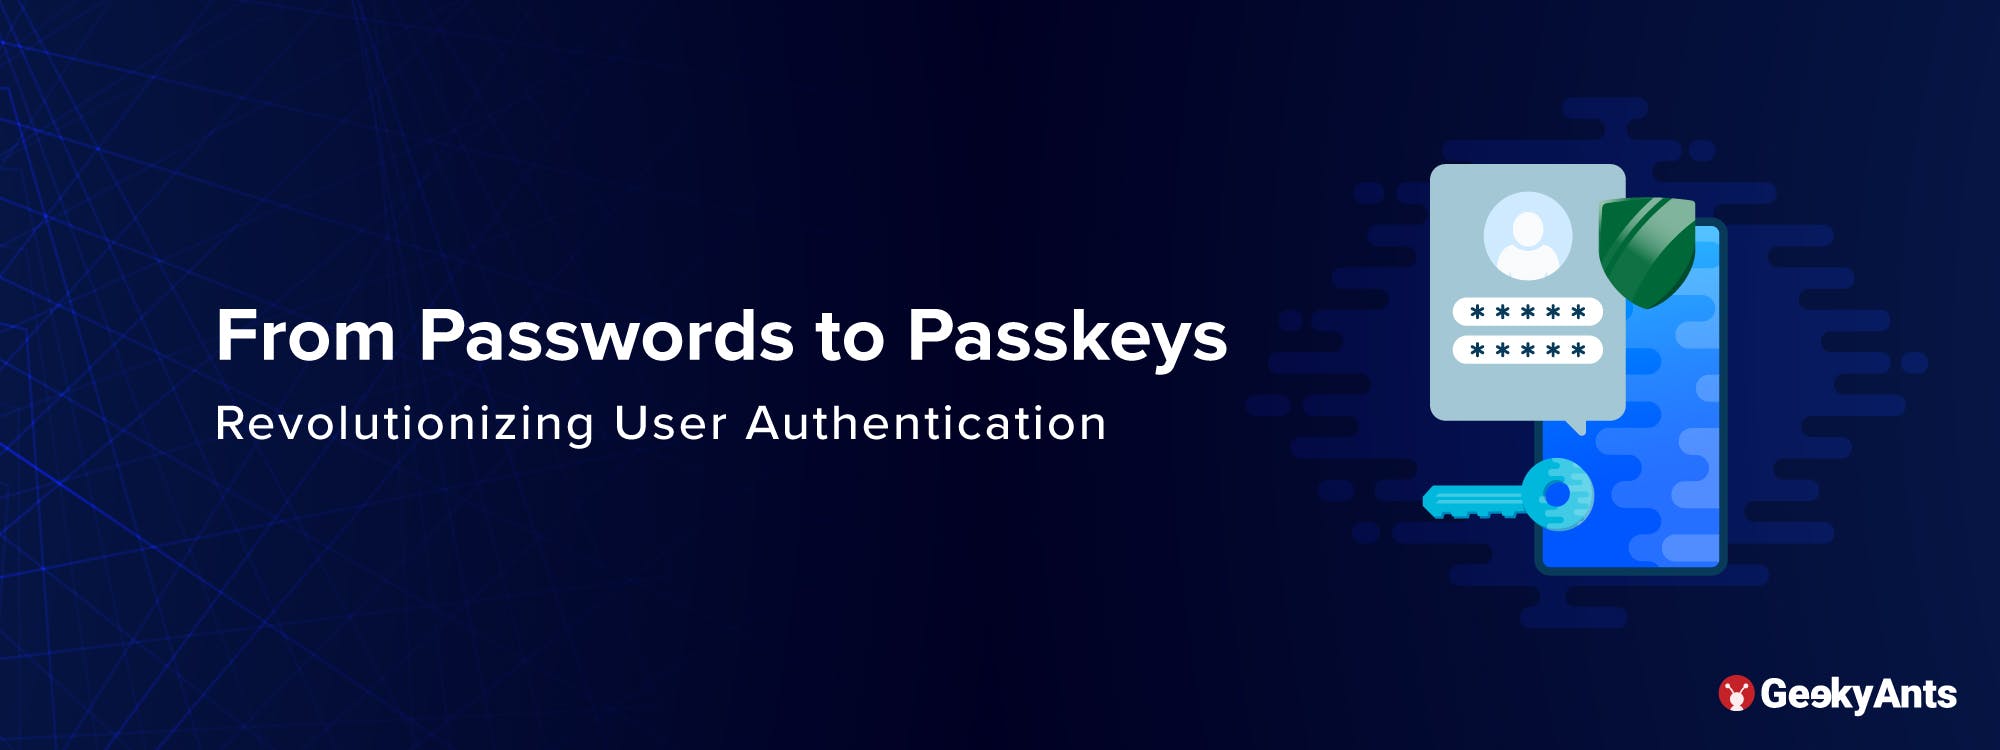 From Passwords to Passkeys: Revolutionizing User Authentication